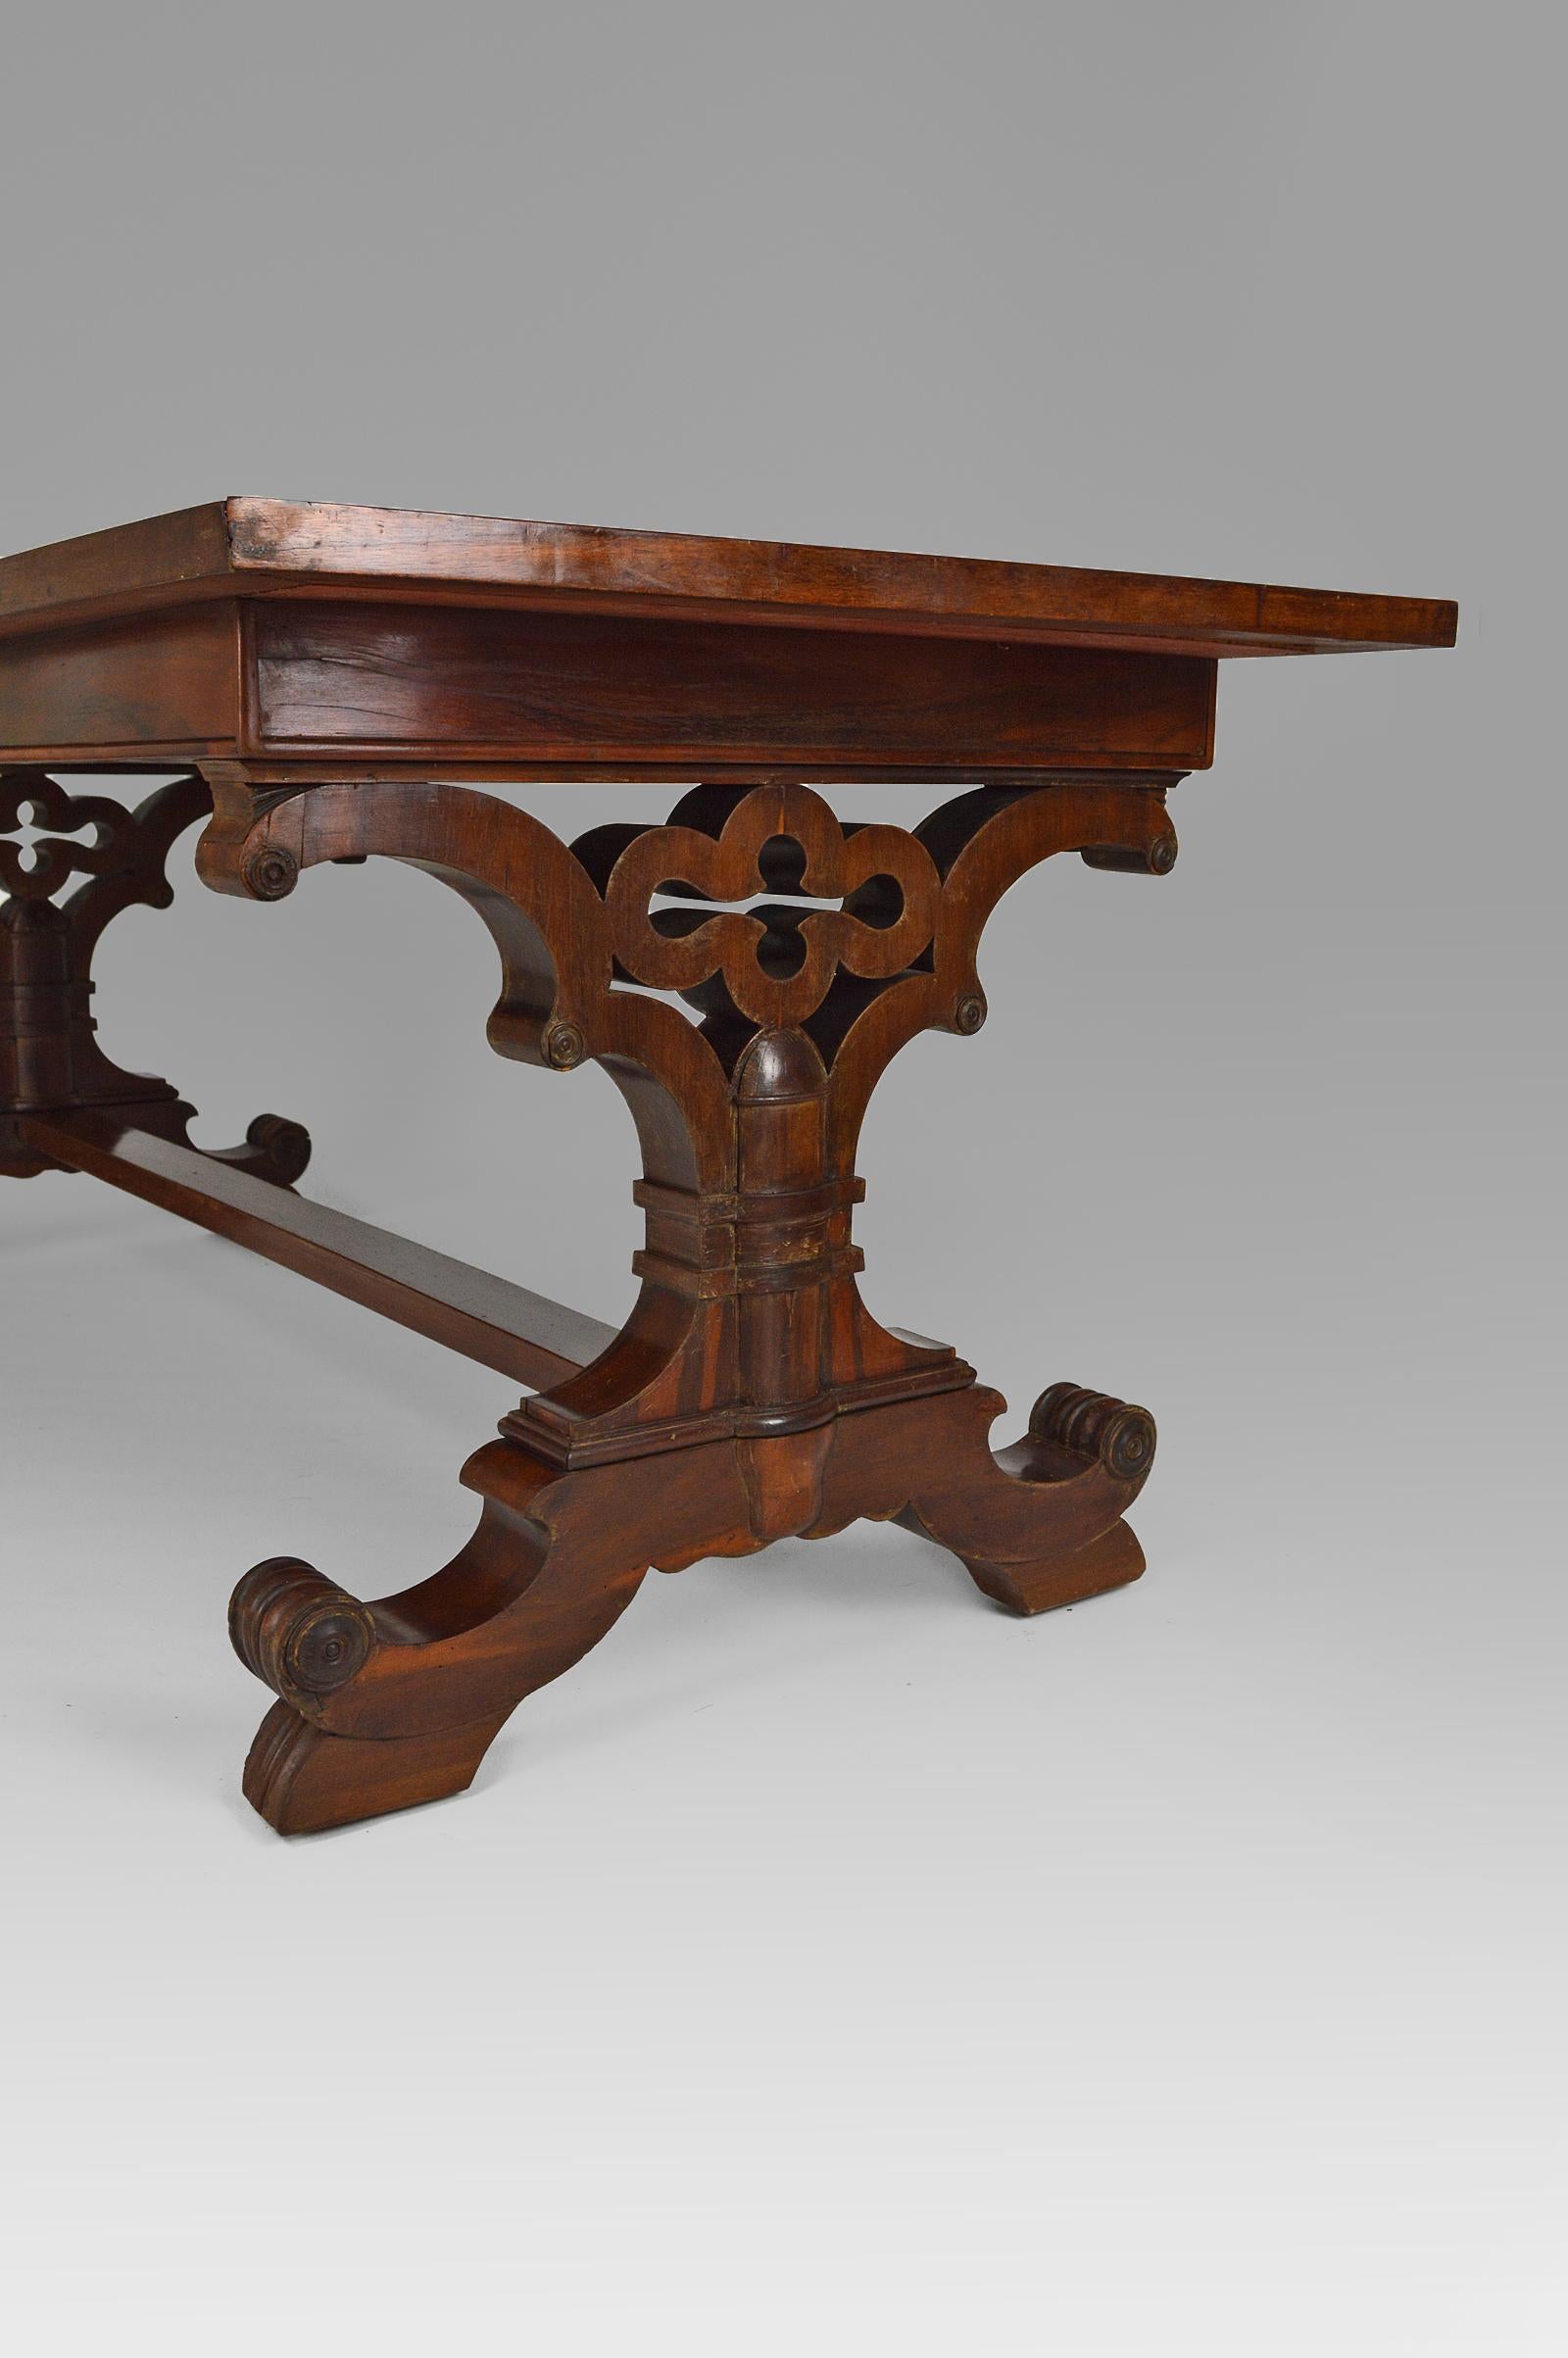 Gothic Revival Dining Table in Mahogany, Victorian Era, circa 1840 For Sale 5